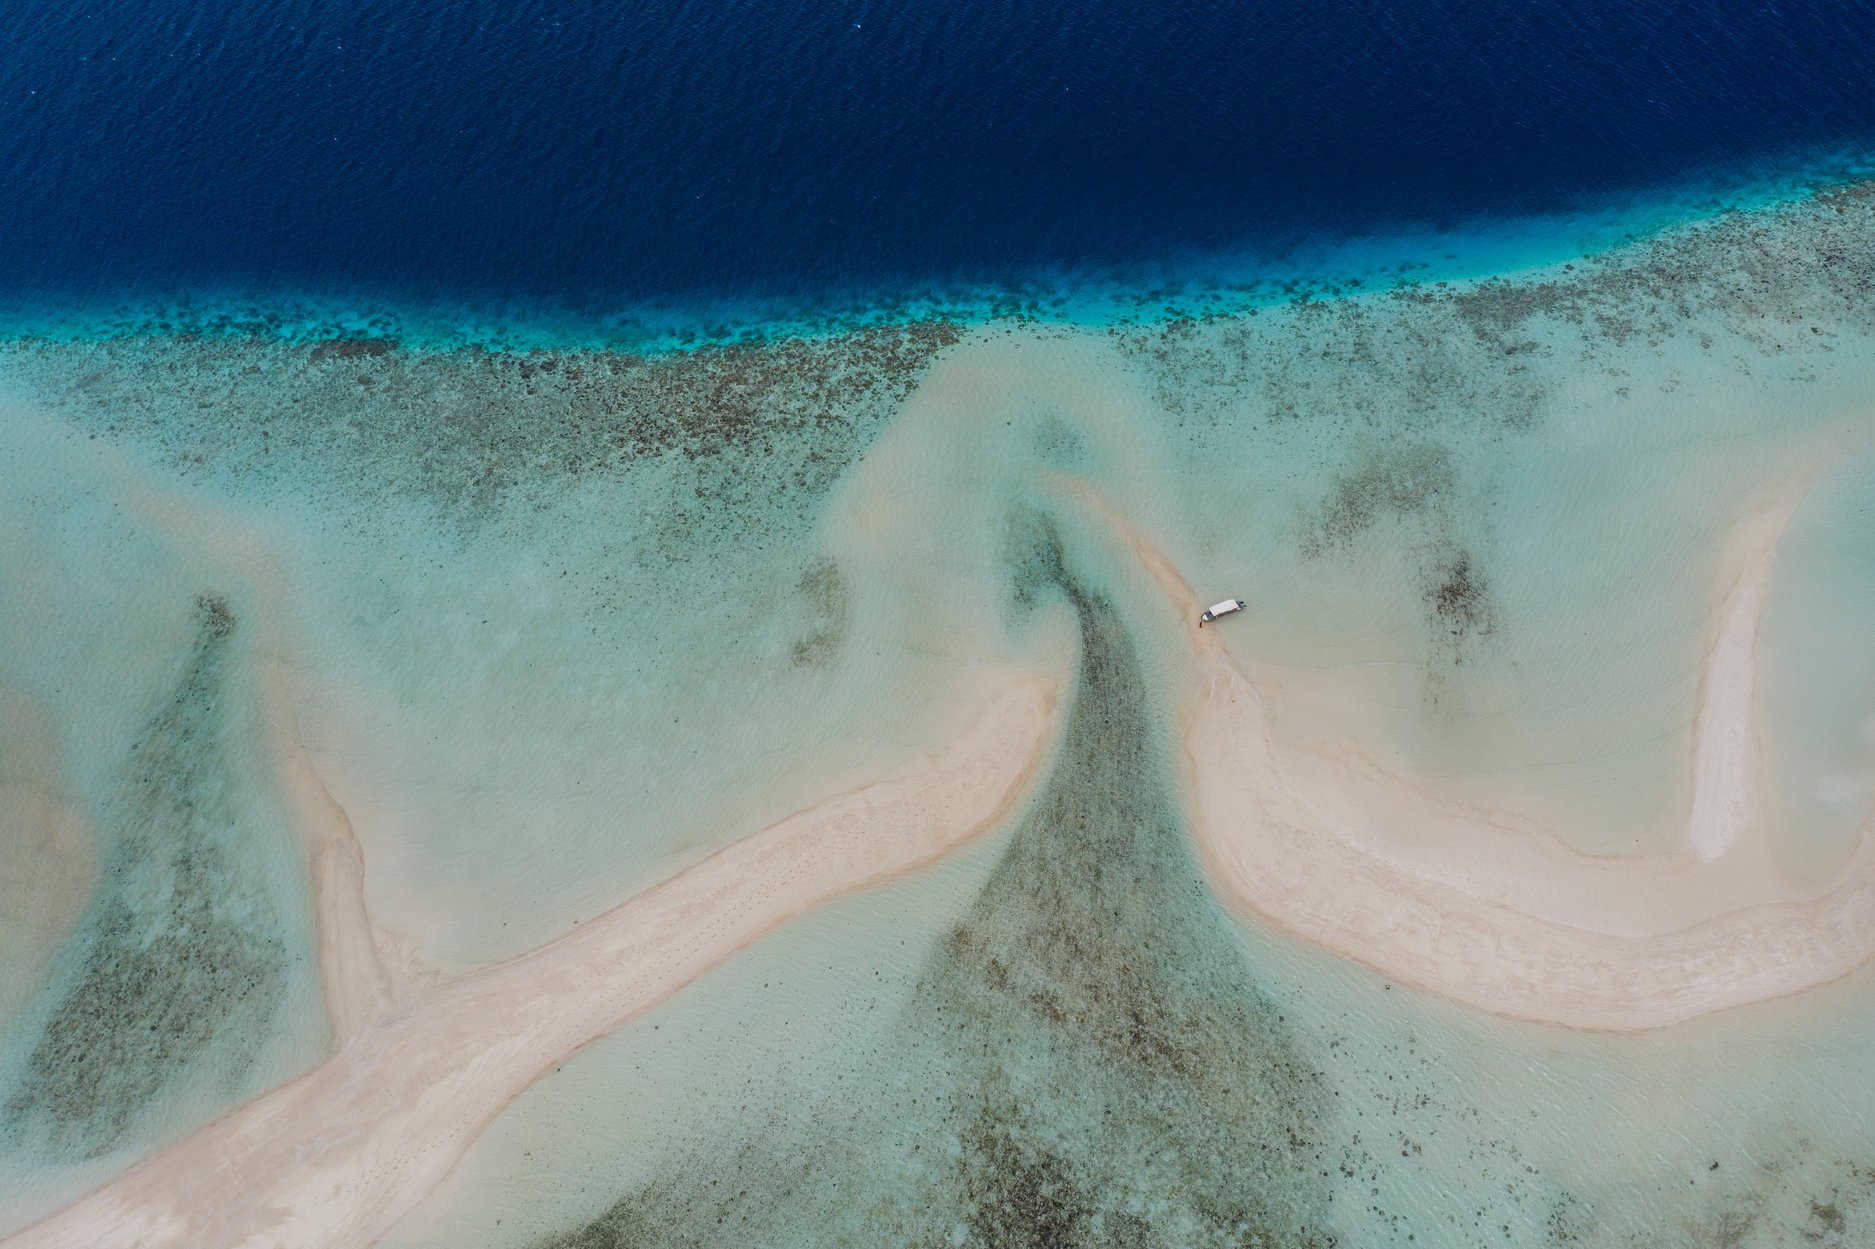 Sand Bar Drone taken by Papua Diving team